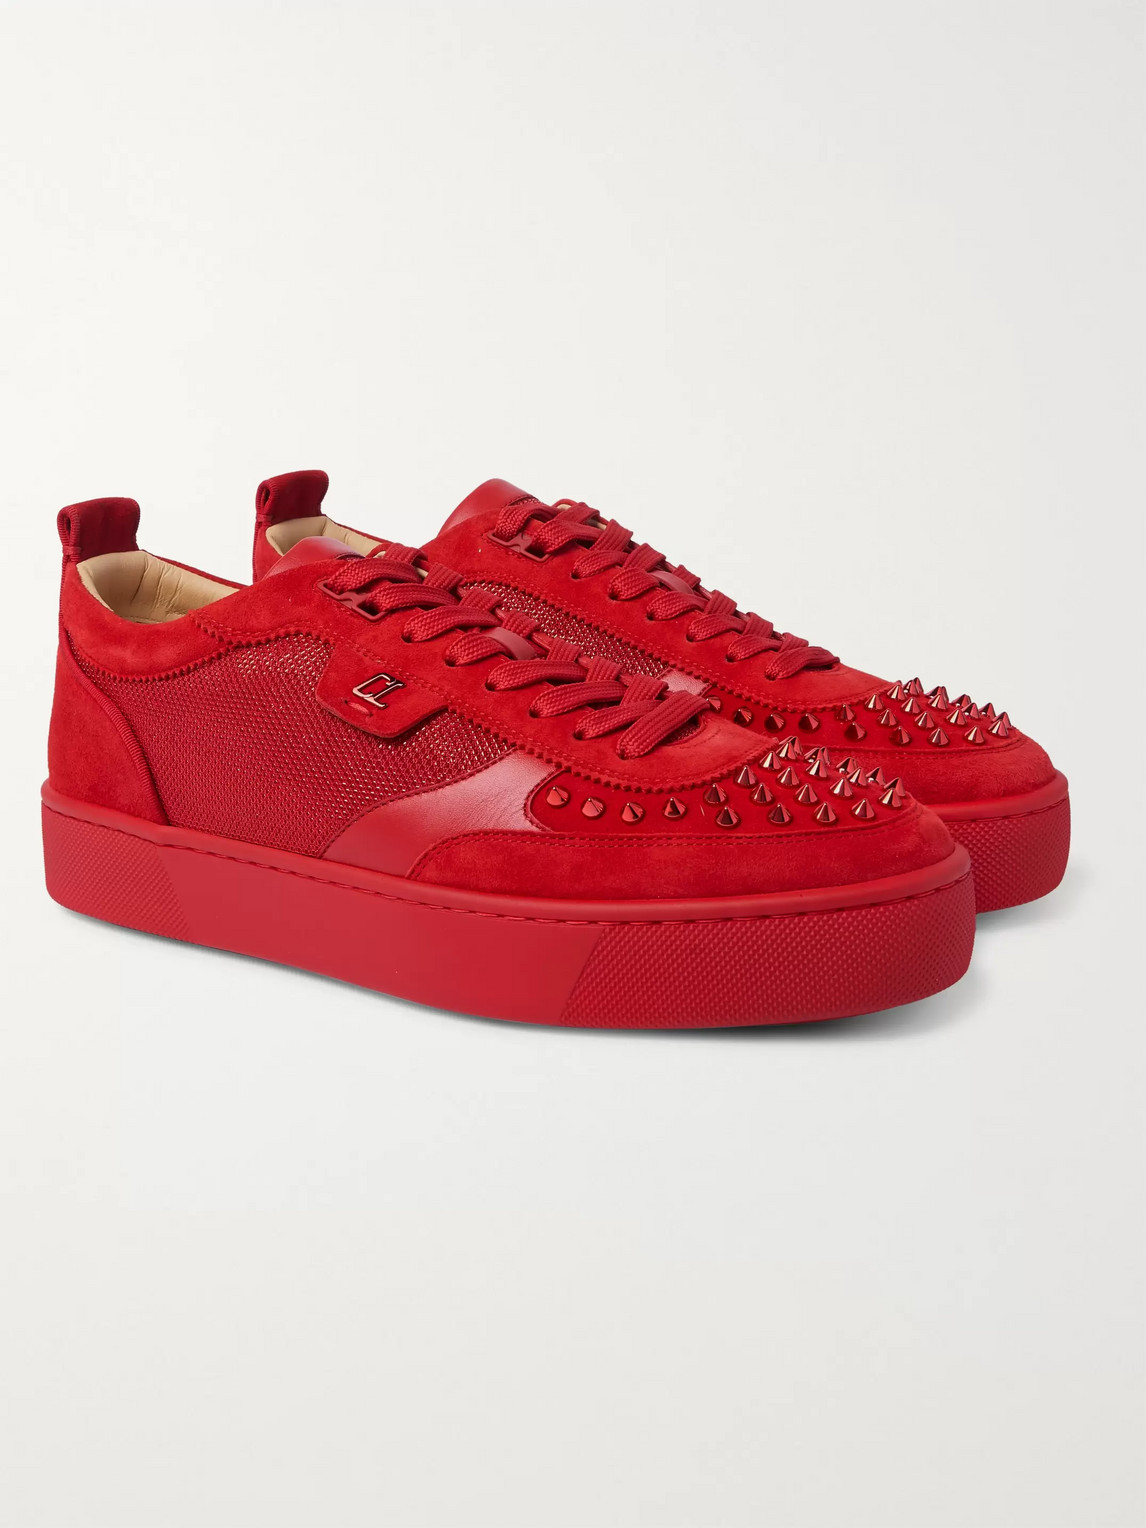 CHRISTIAN LOUBOUTIN HAPPYRUI SPIKED SUEDE-TRIMMED GLITTERED-MESH SNEAKERS